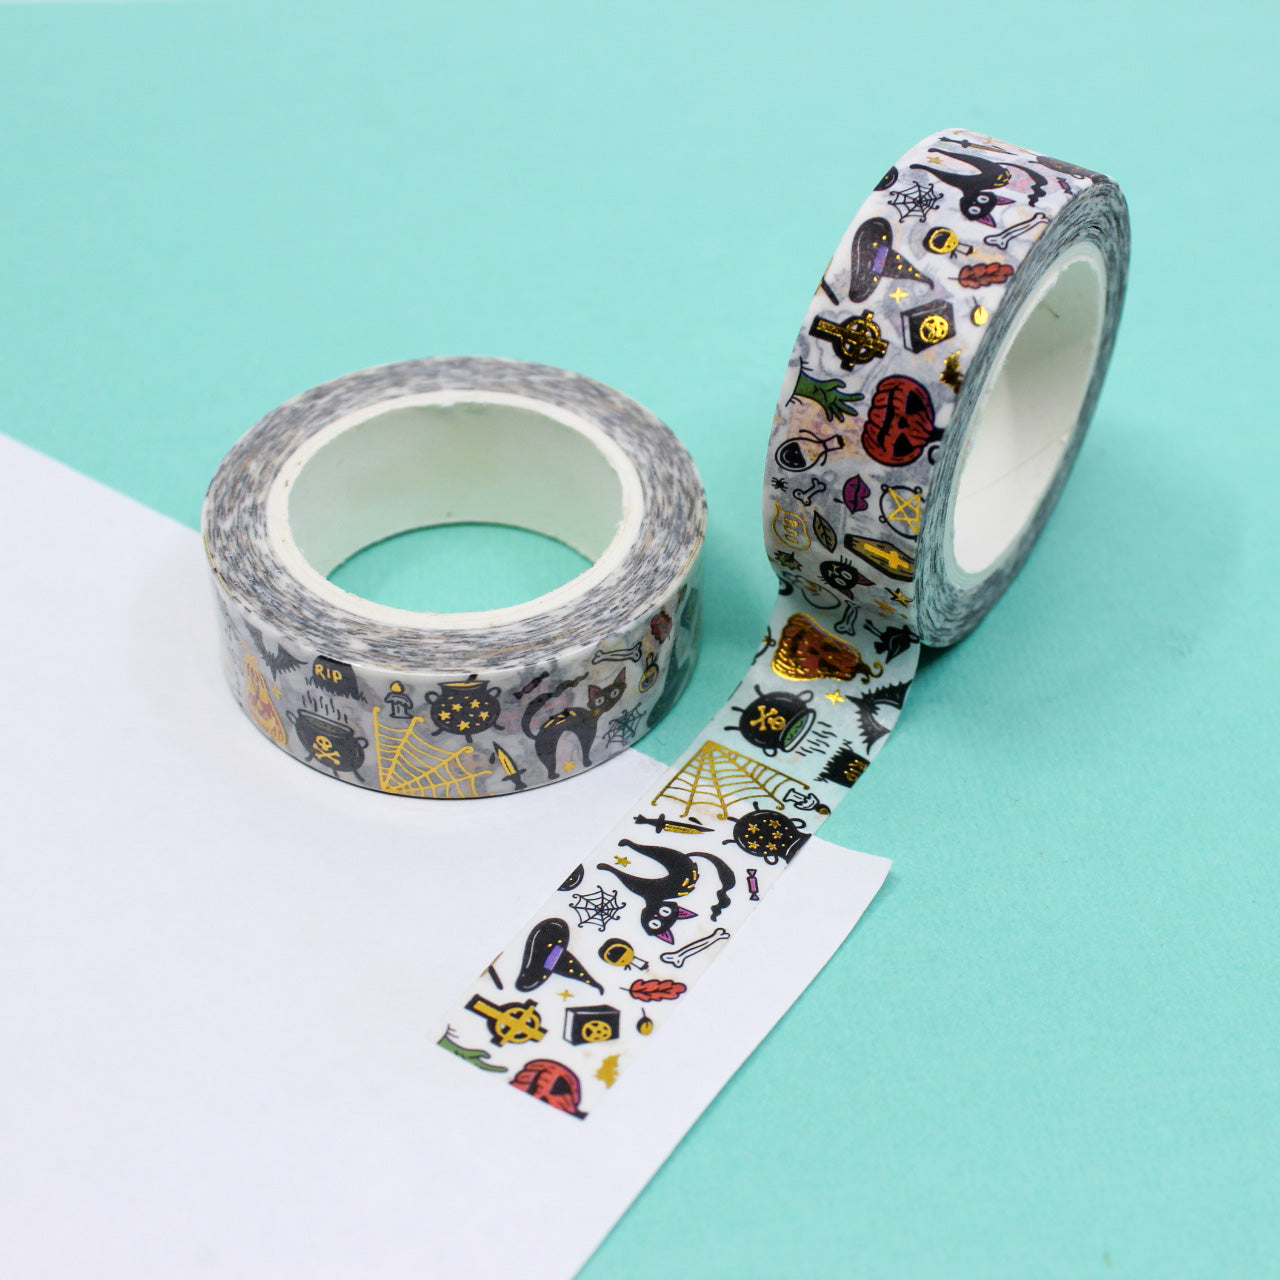 Elevate your Halloween crafts with our Gold Foil Halloween Objects Washi Tape, featuring a collection of spooky and stylish Halloween-themed illustrations in shimmering gold foil. Ideal for adding an elegant and festive touch to your projects. This tape is sold at BBB Supplies Craft Shop.